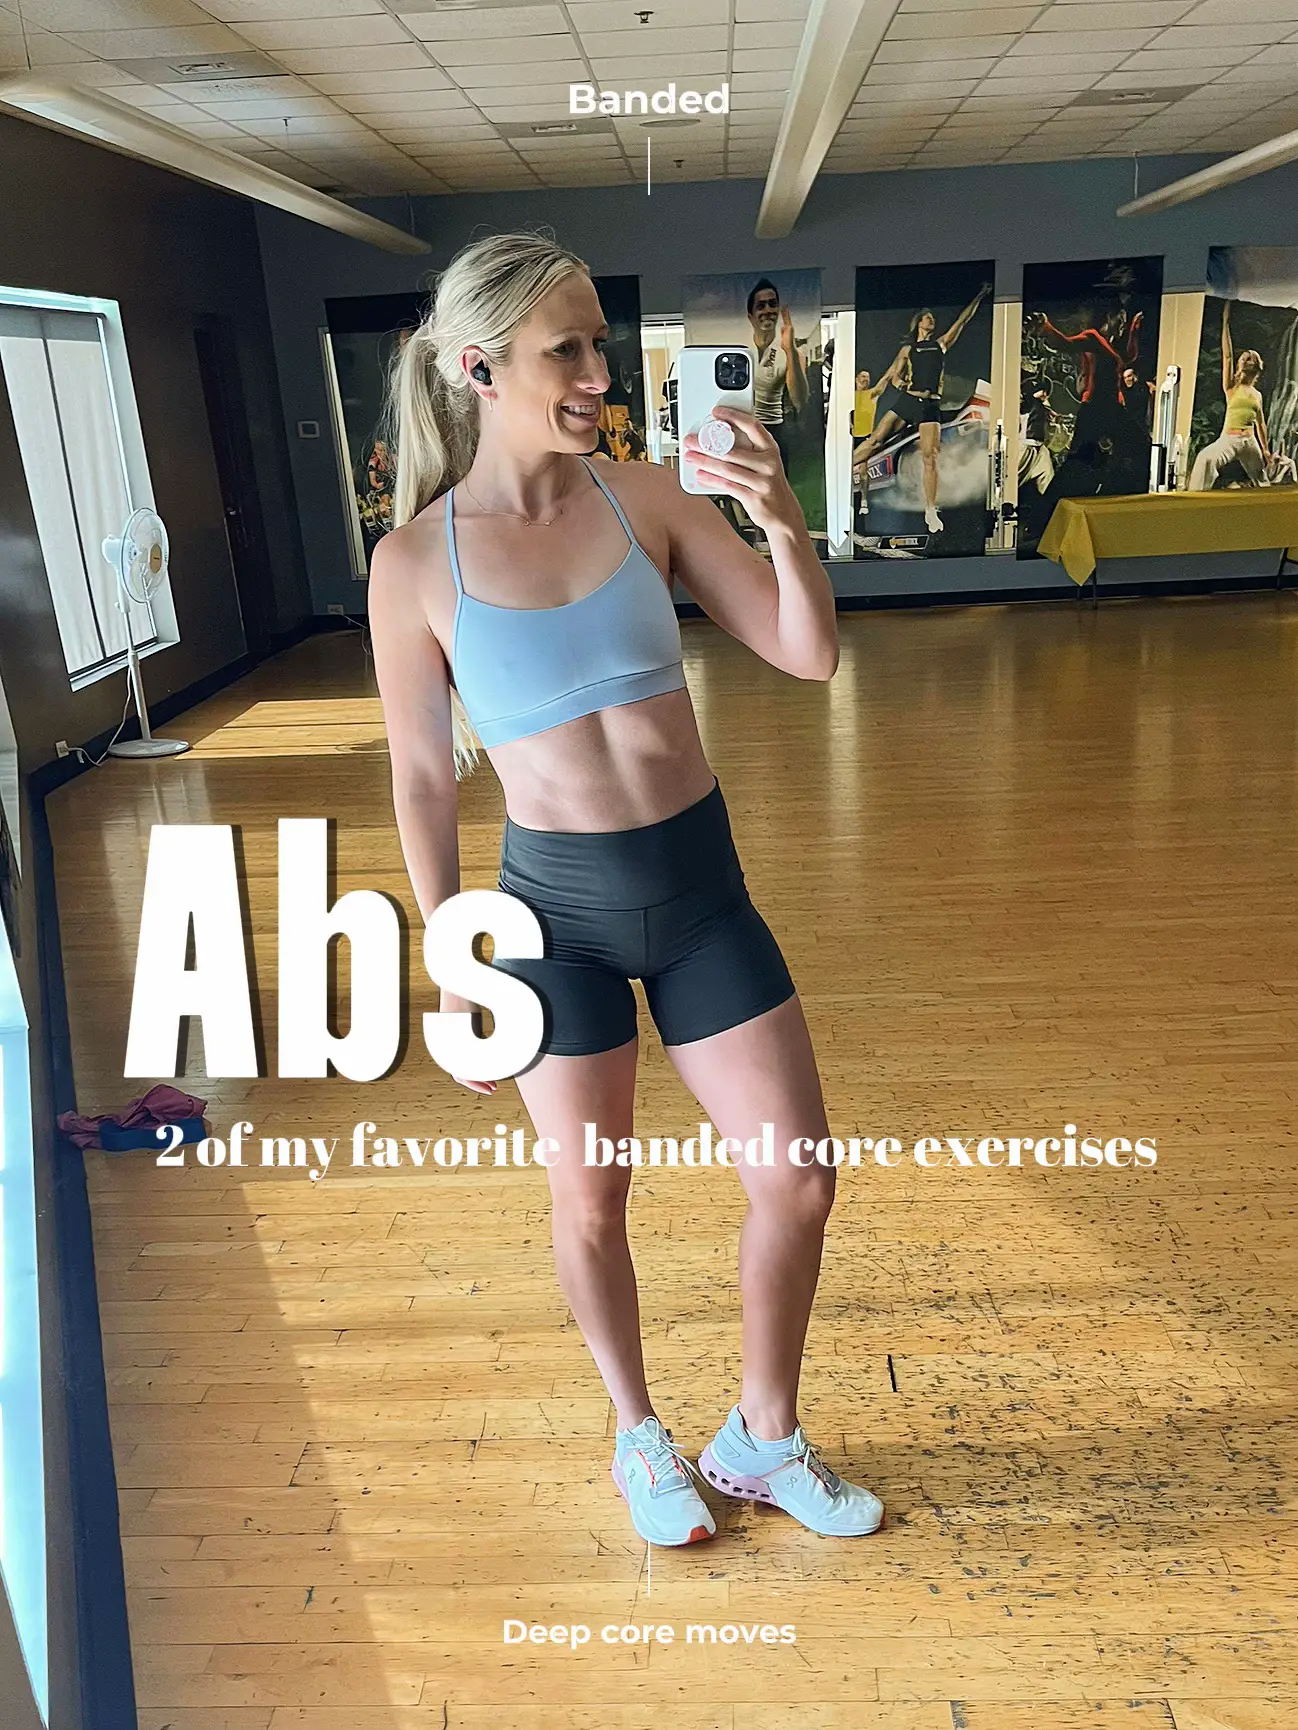 Ultimate Core Restore and Corset Abs Workout